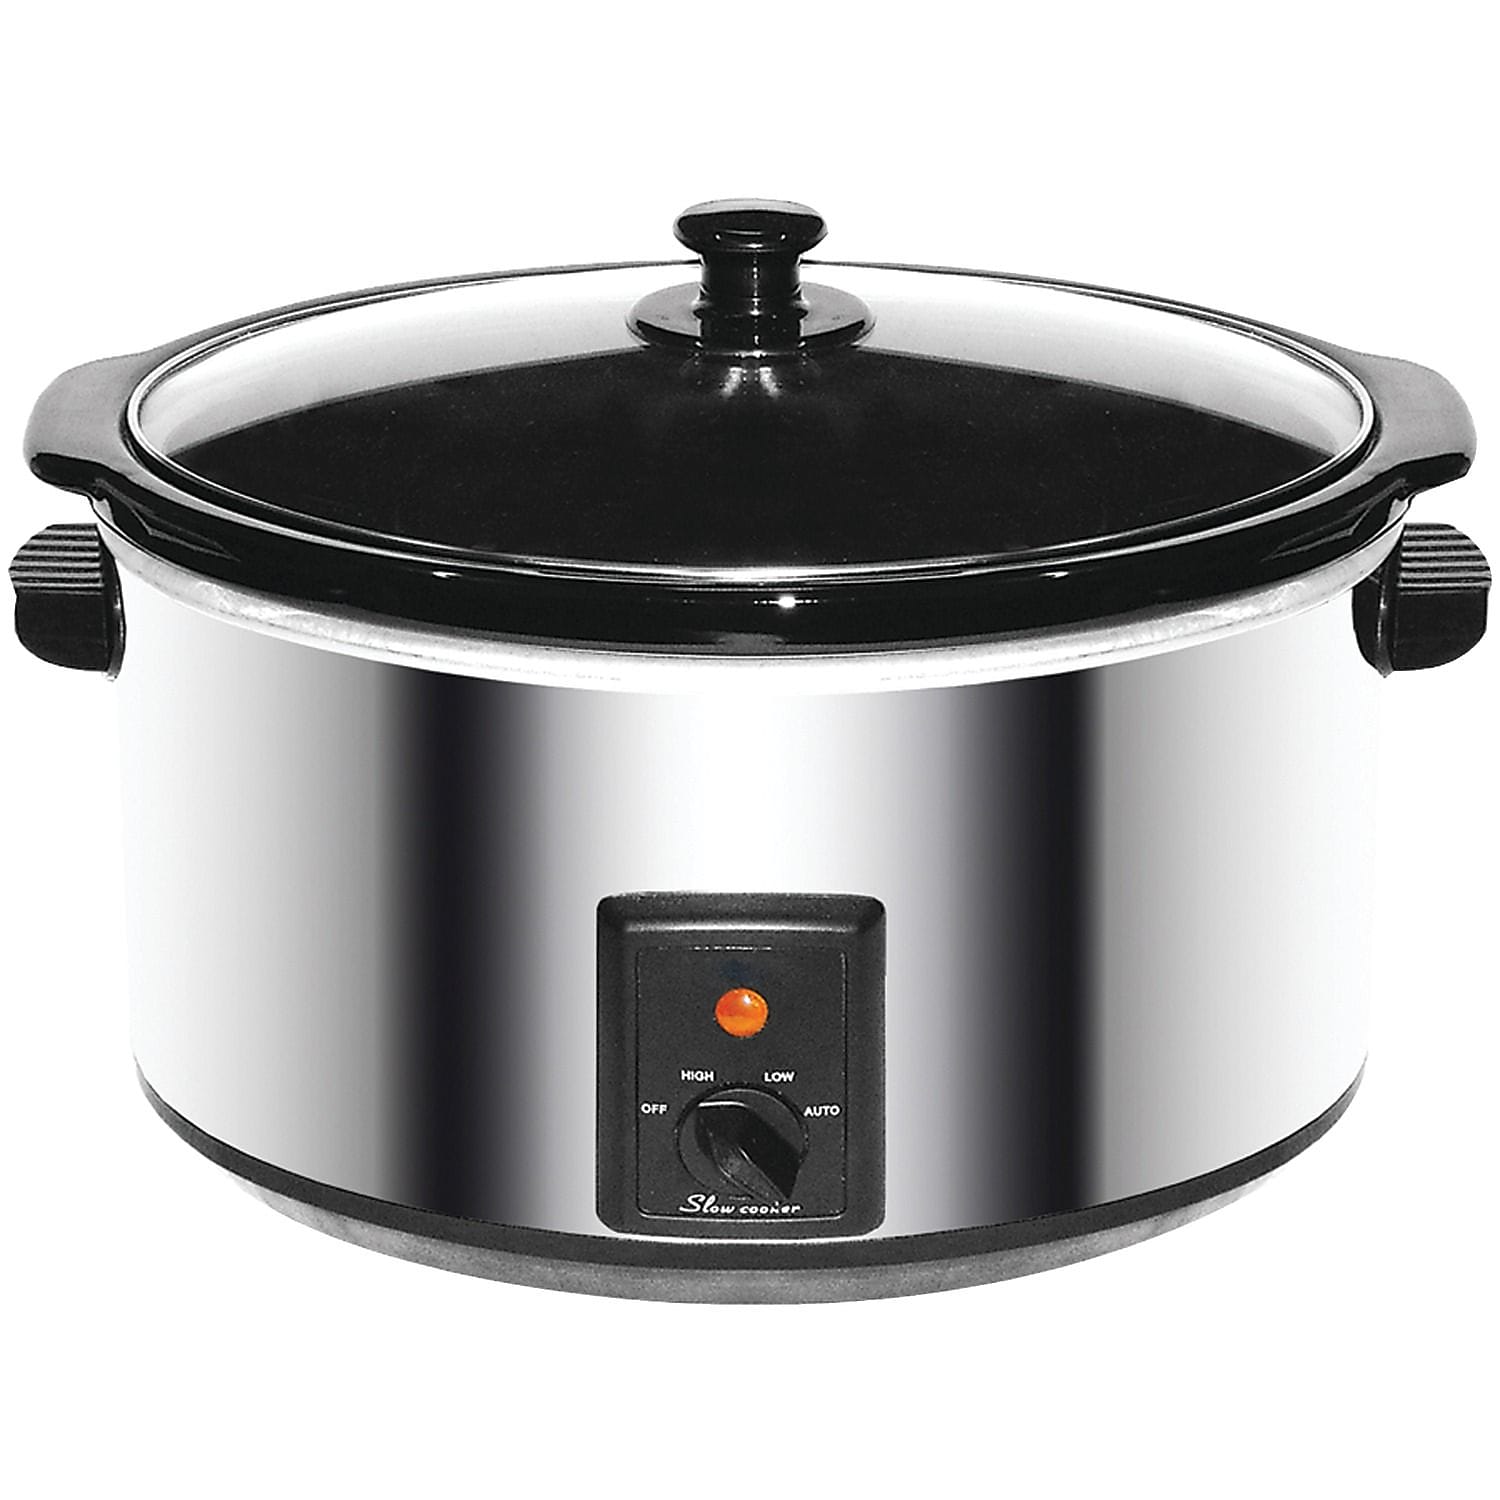 Brentwood SC-170S 8 Qt Slow Cooker Stainless Steel - image 1 of 8